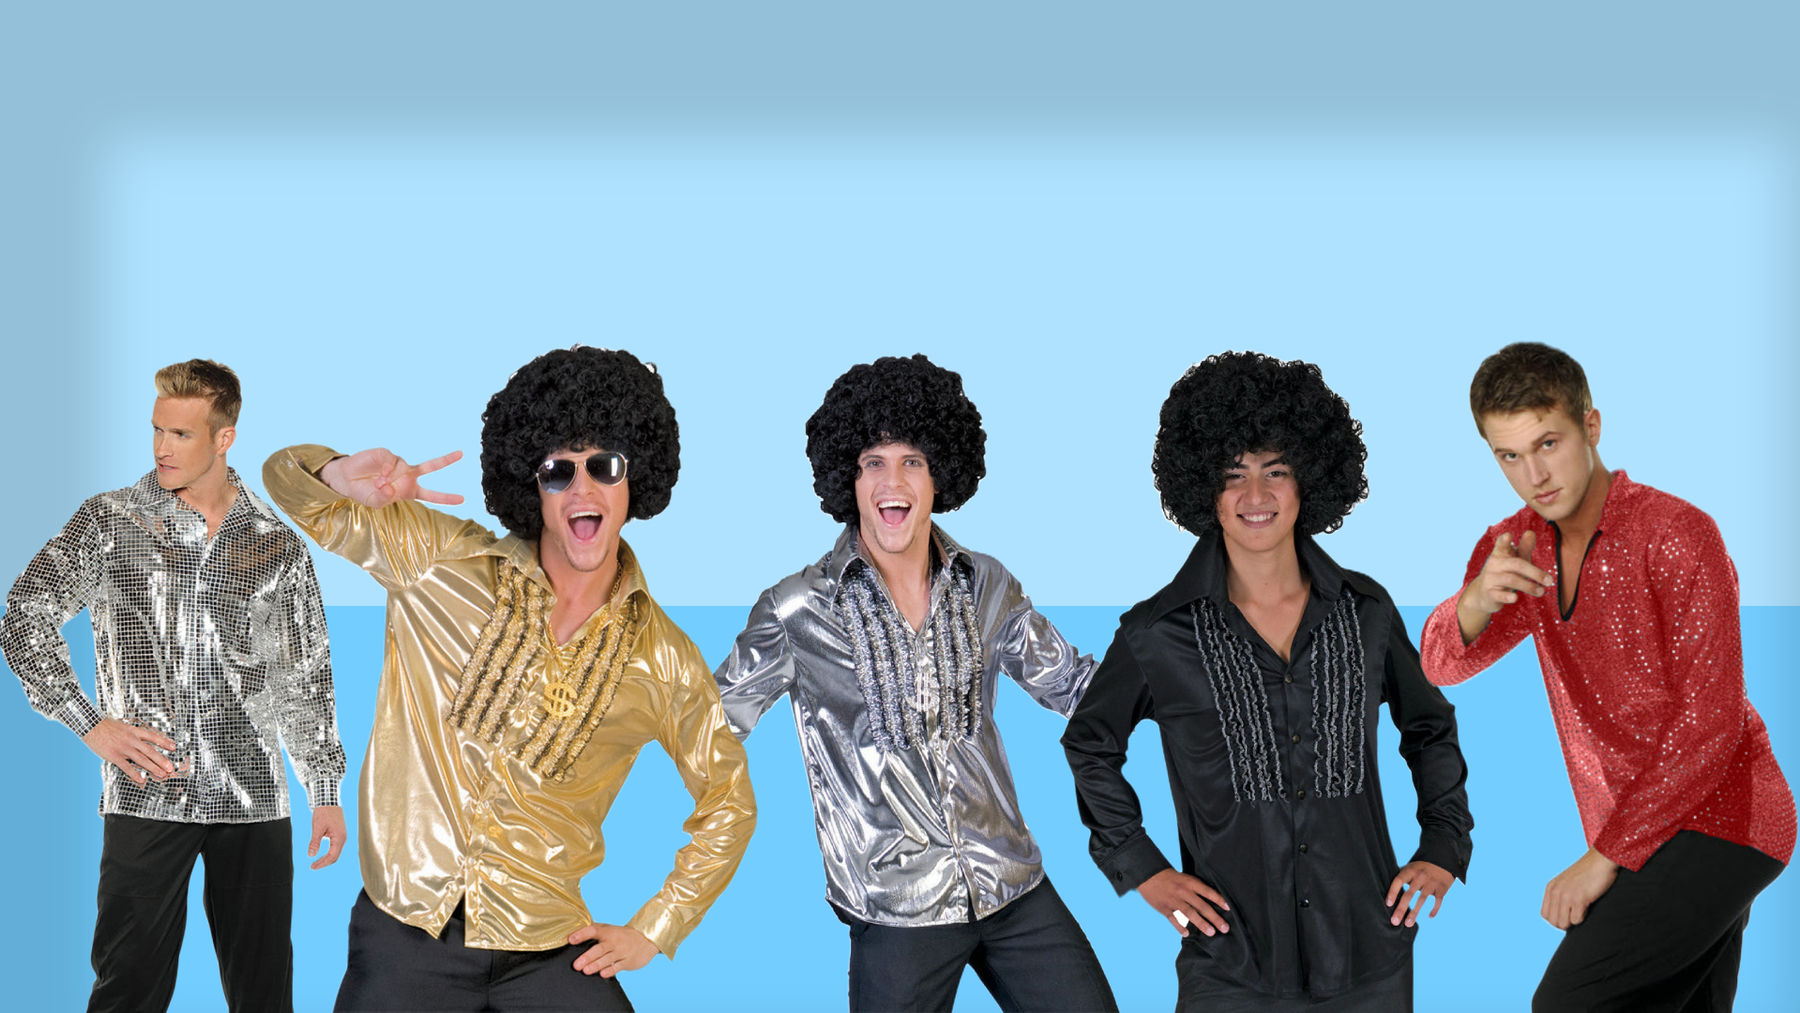 Get Your Disco Inferno On with The Top 5 Men's Costume Picks